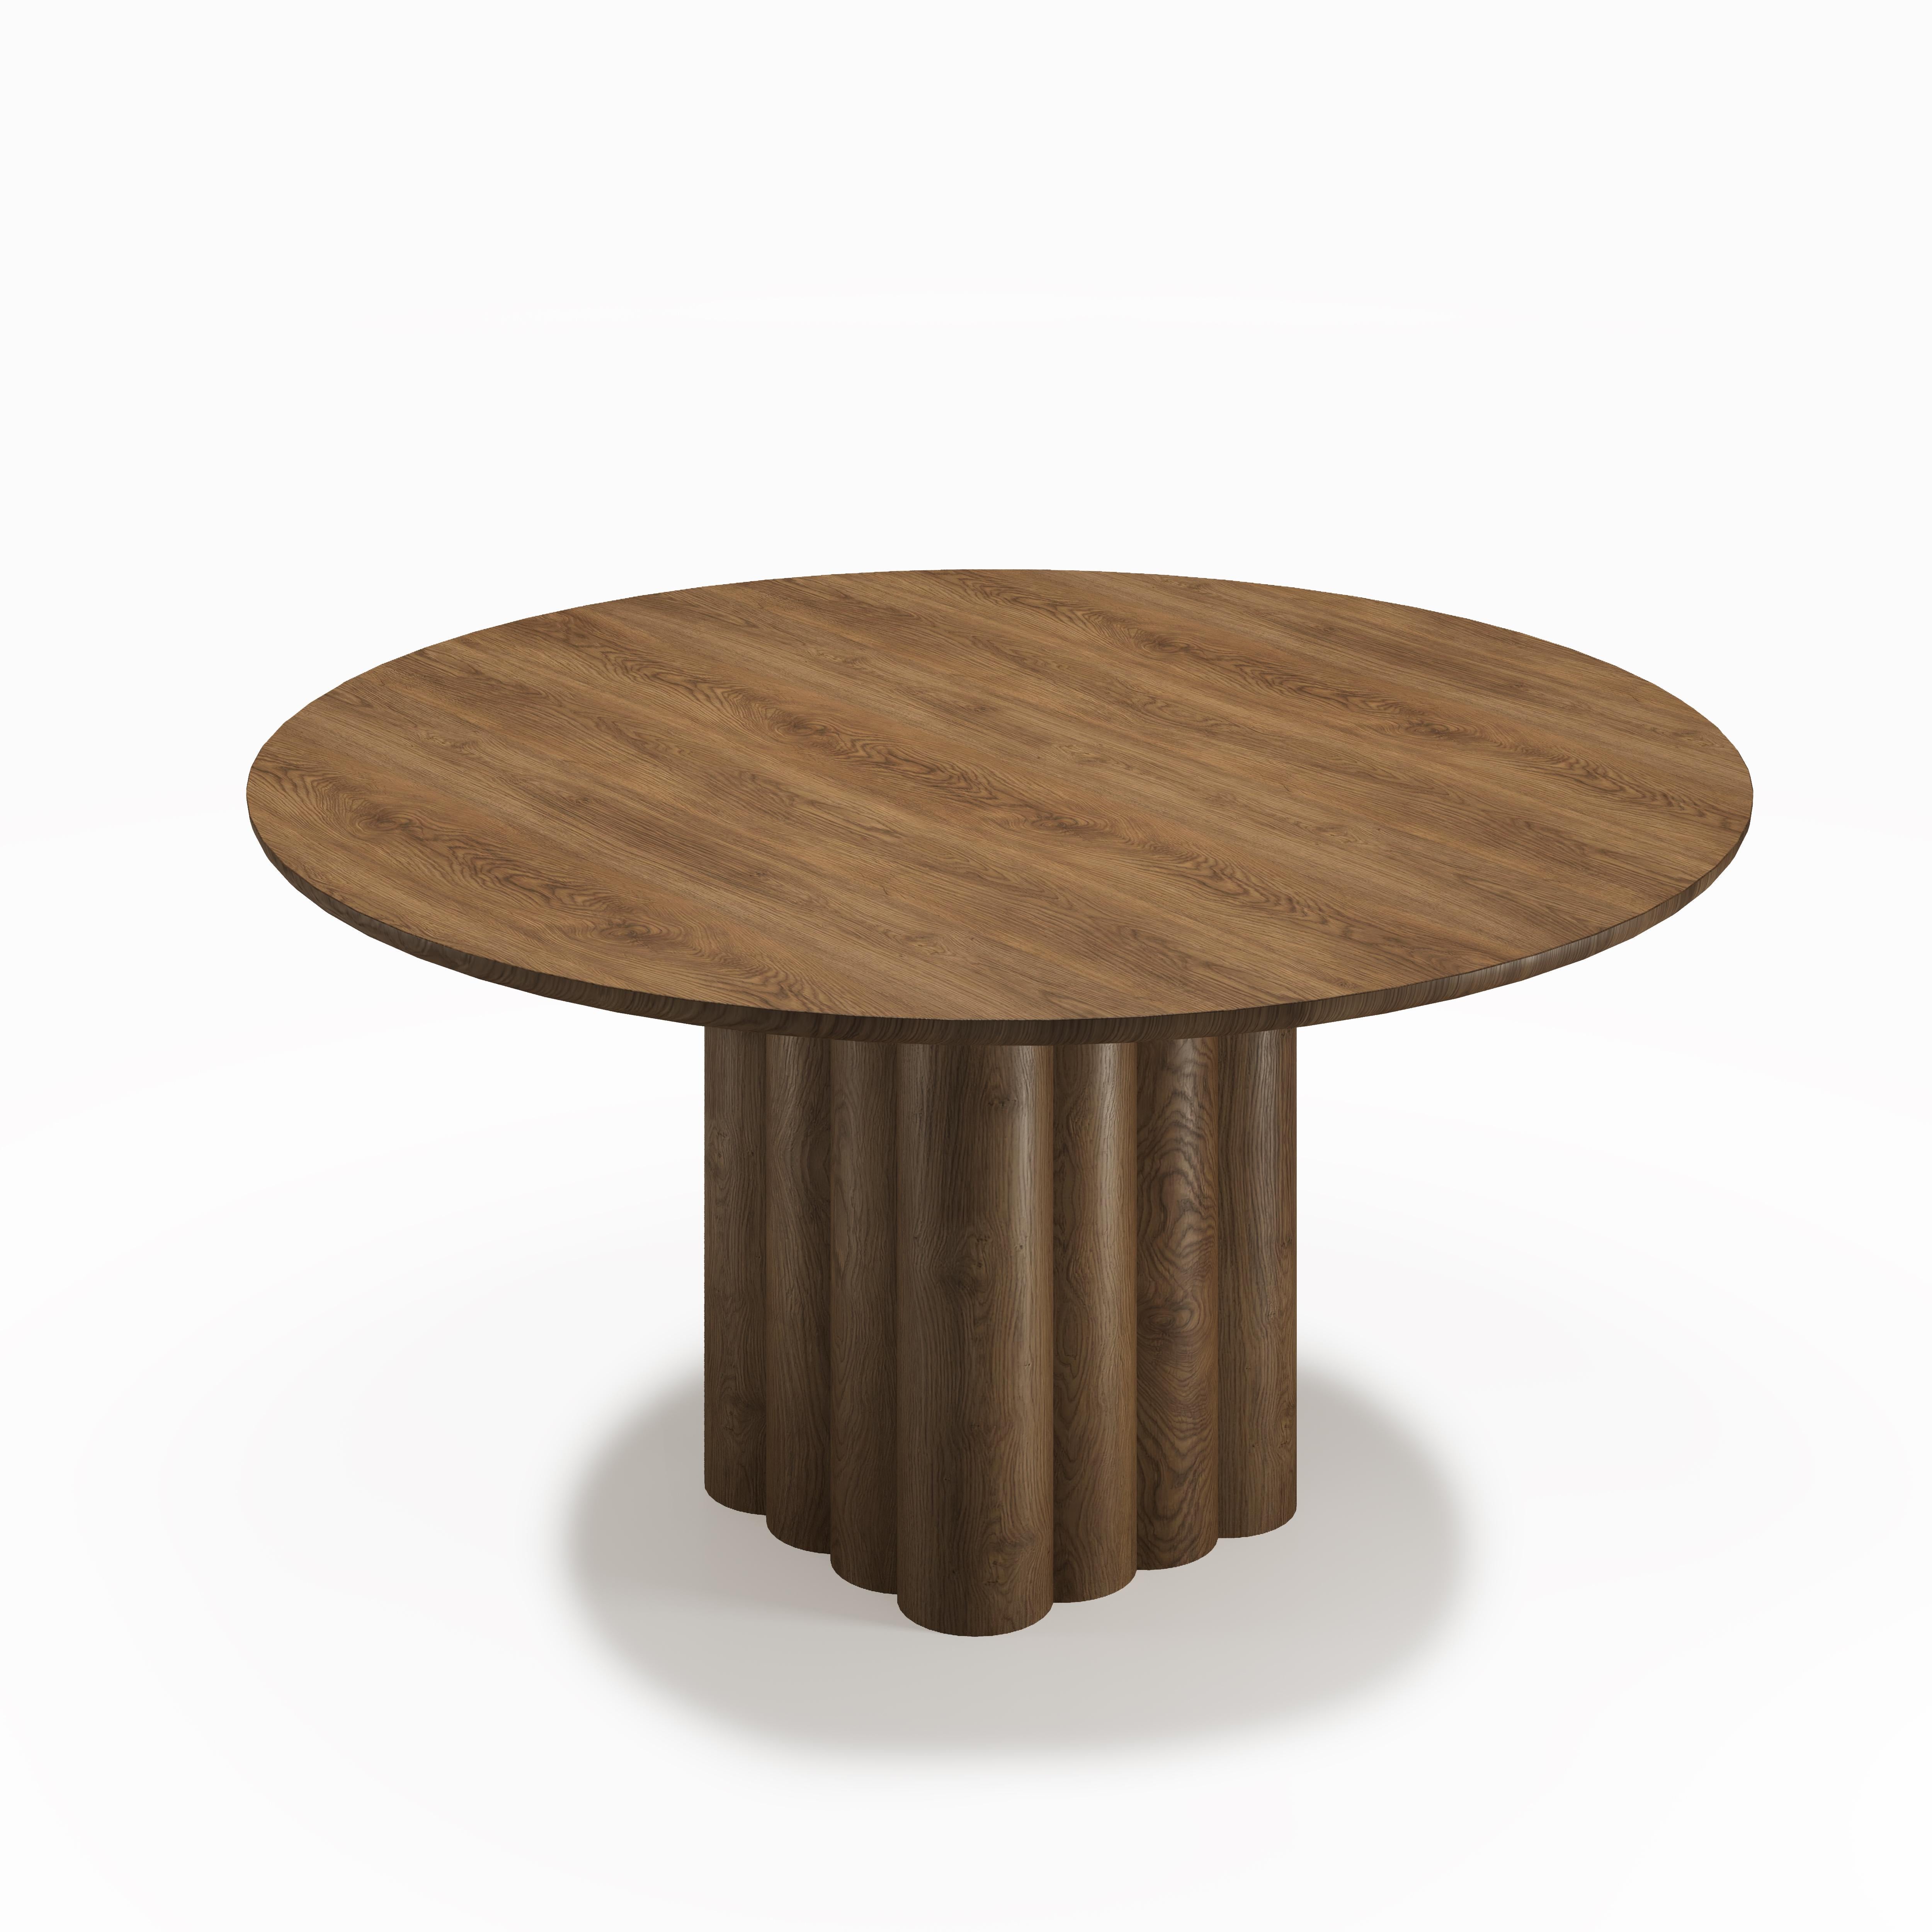 Round Dining Table 'Plush' by Dk3, Smoked Oak or Walnut, 140 cm For Sale 7